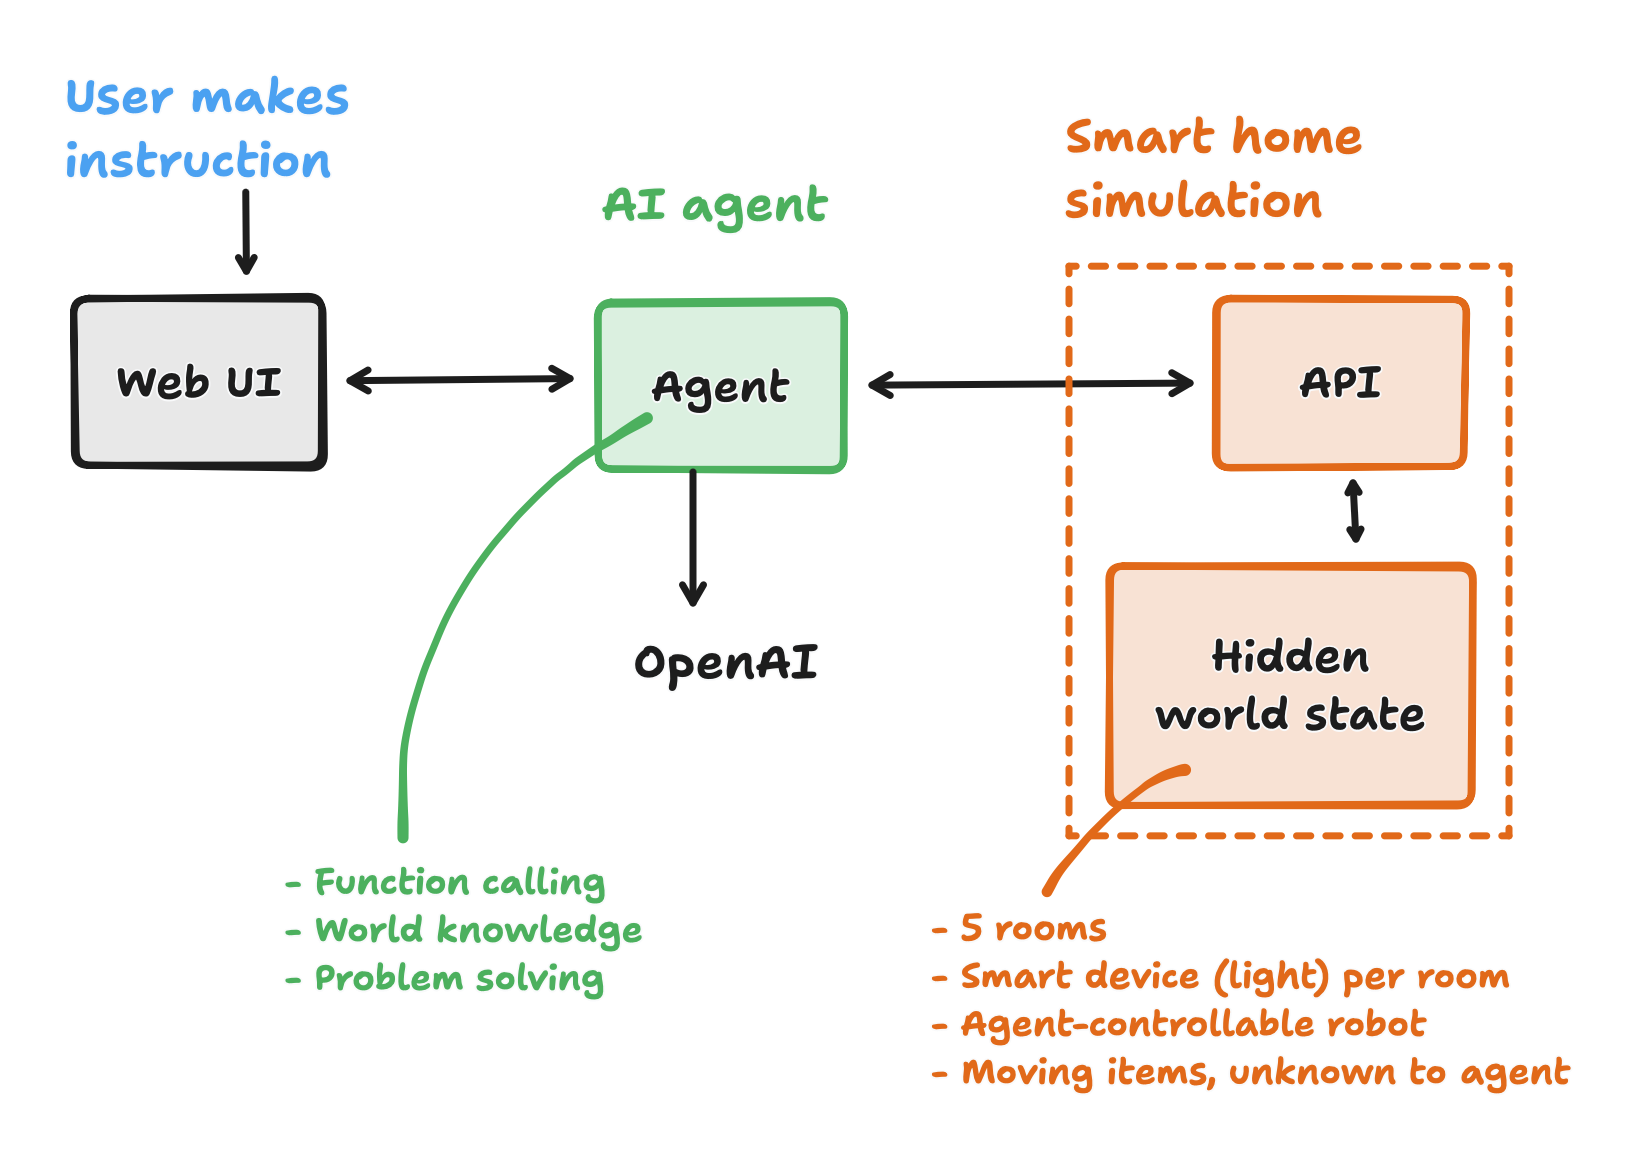 A graphic of three boxes: 'Web UI', which connects to 'Agent', which connects 'Smart Home Simulation.' The simulation box contains an API box and a State box.